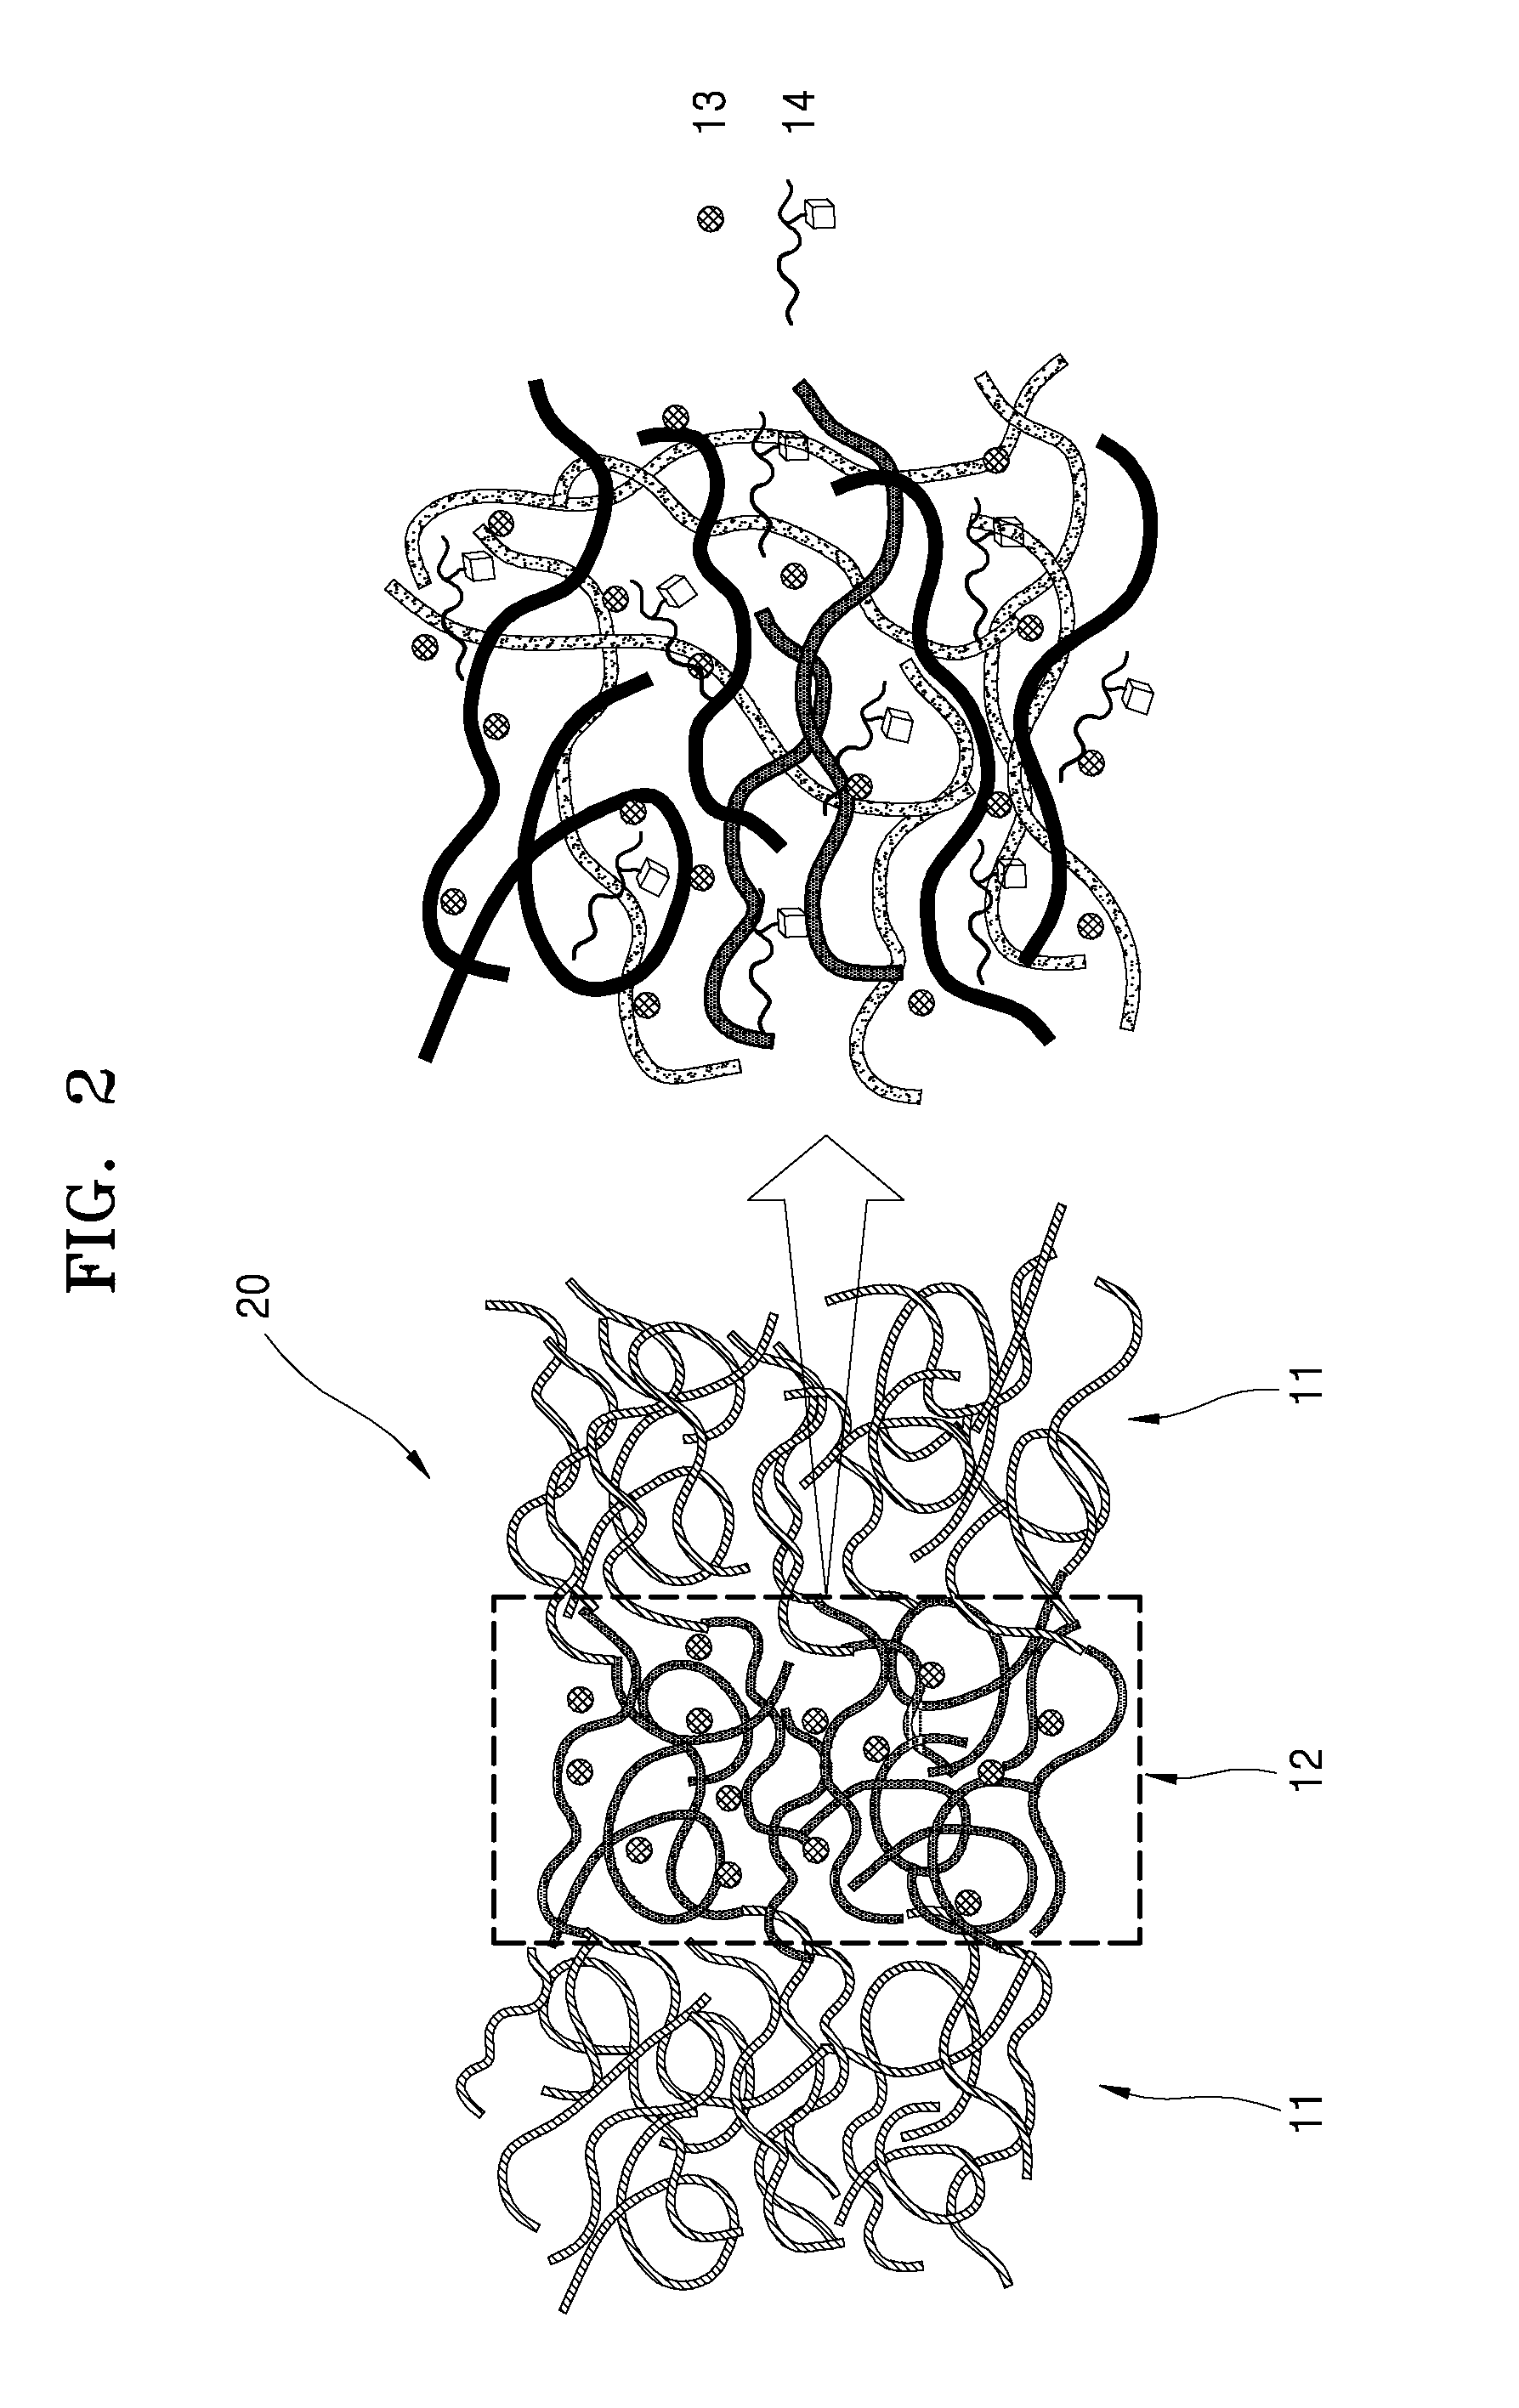 Organic-inorganic silicon structure-containing block copolymer, electrolyte including the same, and lithium battery including the electrolyte